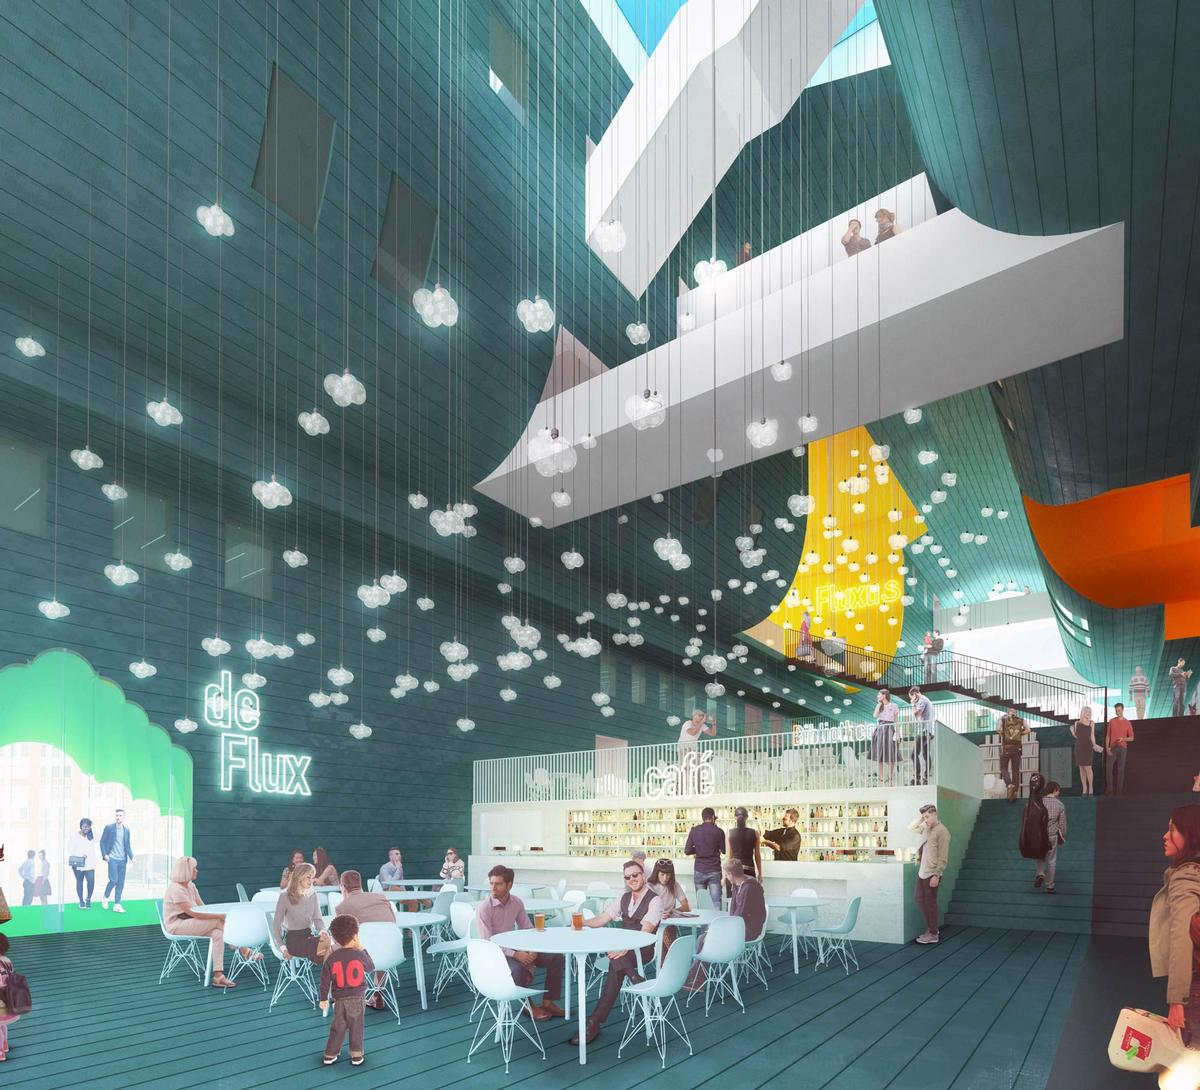 Interior leisure facilities will include cafes, restaurants and shops / MVRDV